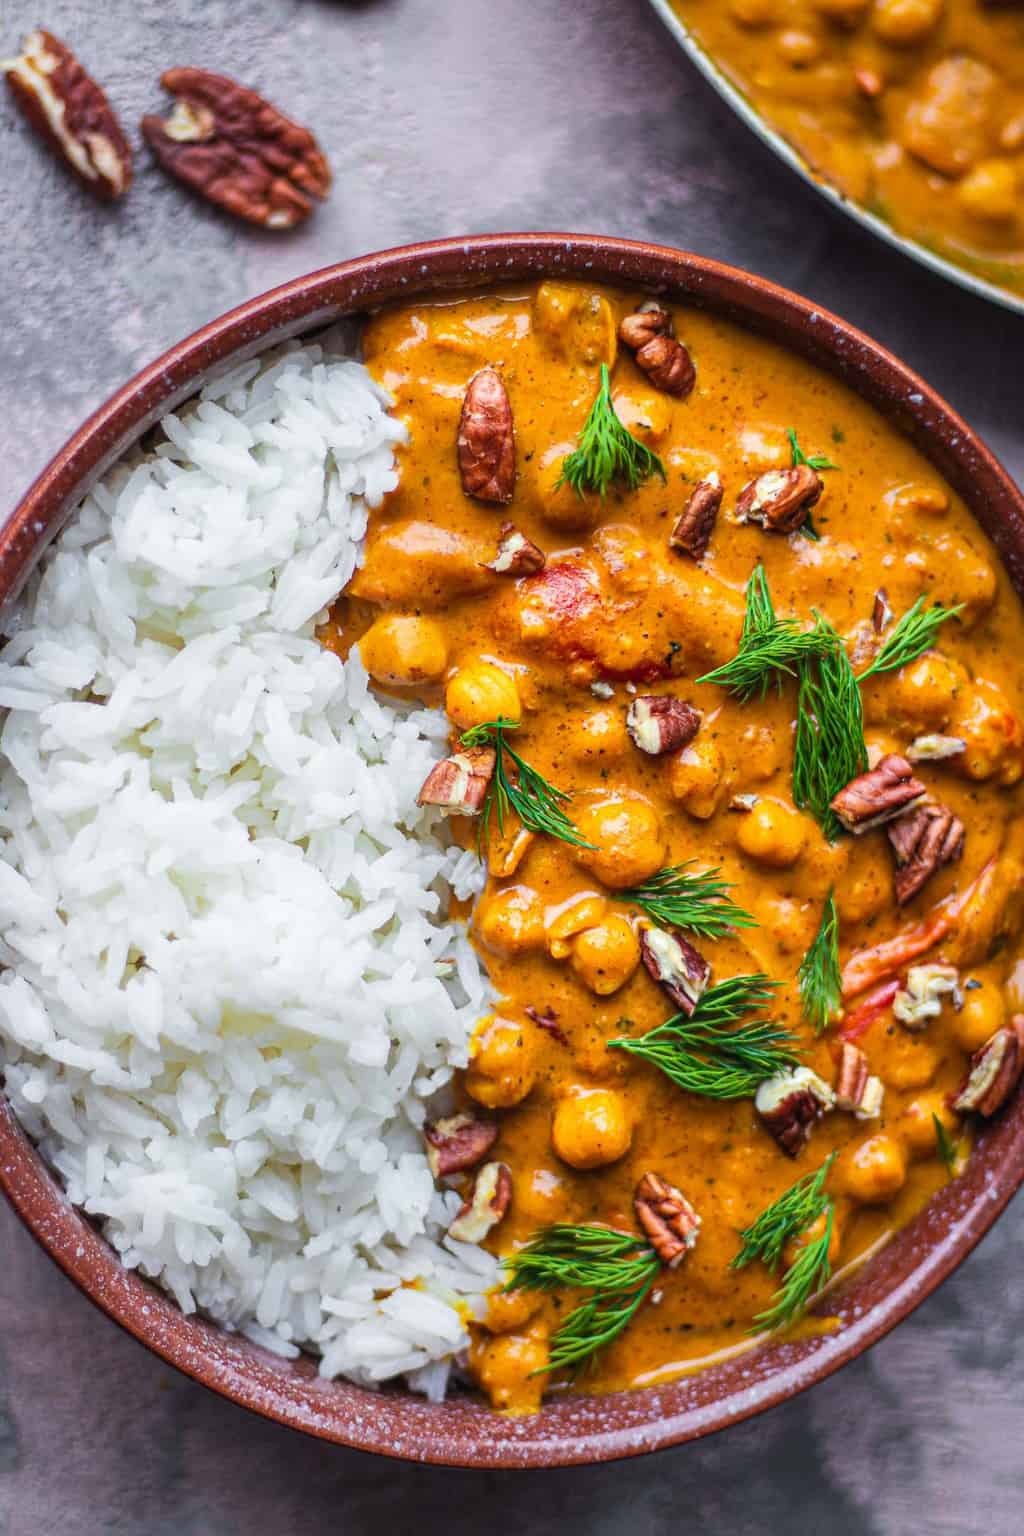 Bowl with chickpeas in a curry sauce over rice